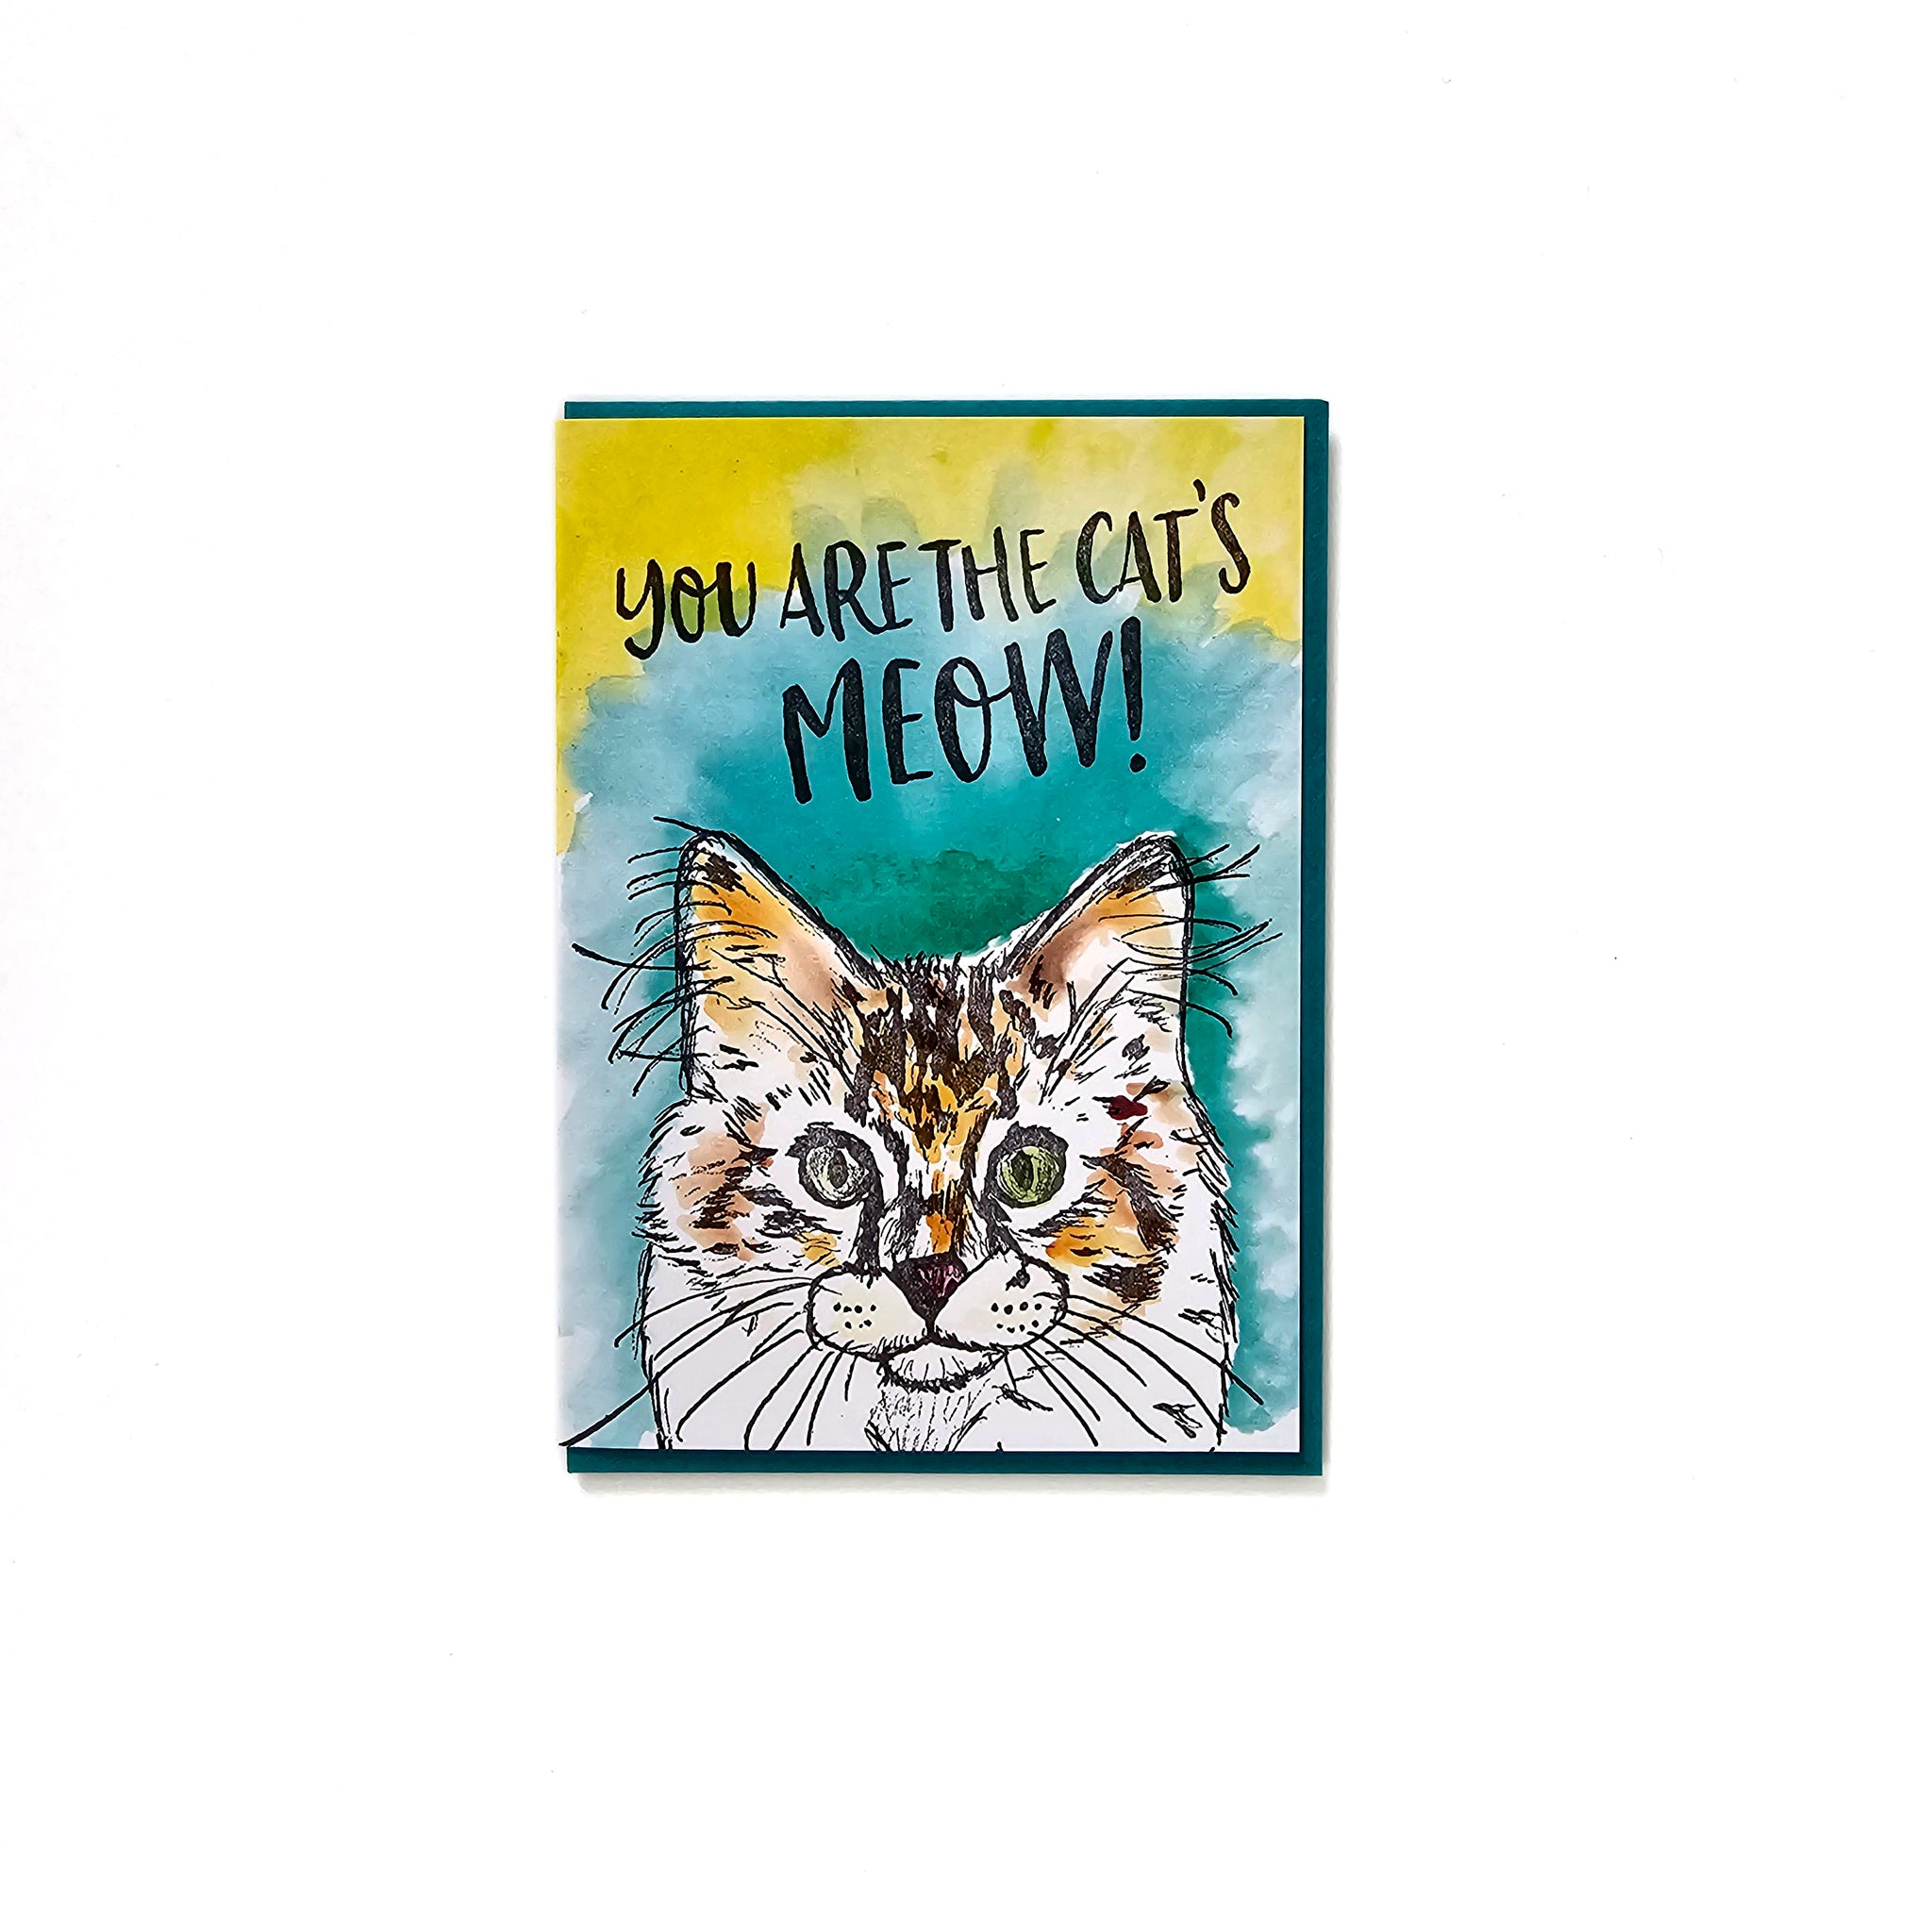 You are the cat's meow, cat illustration letterpress eco friendly